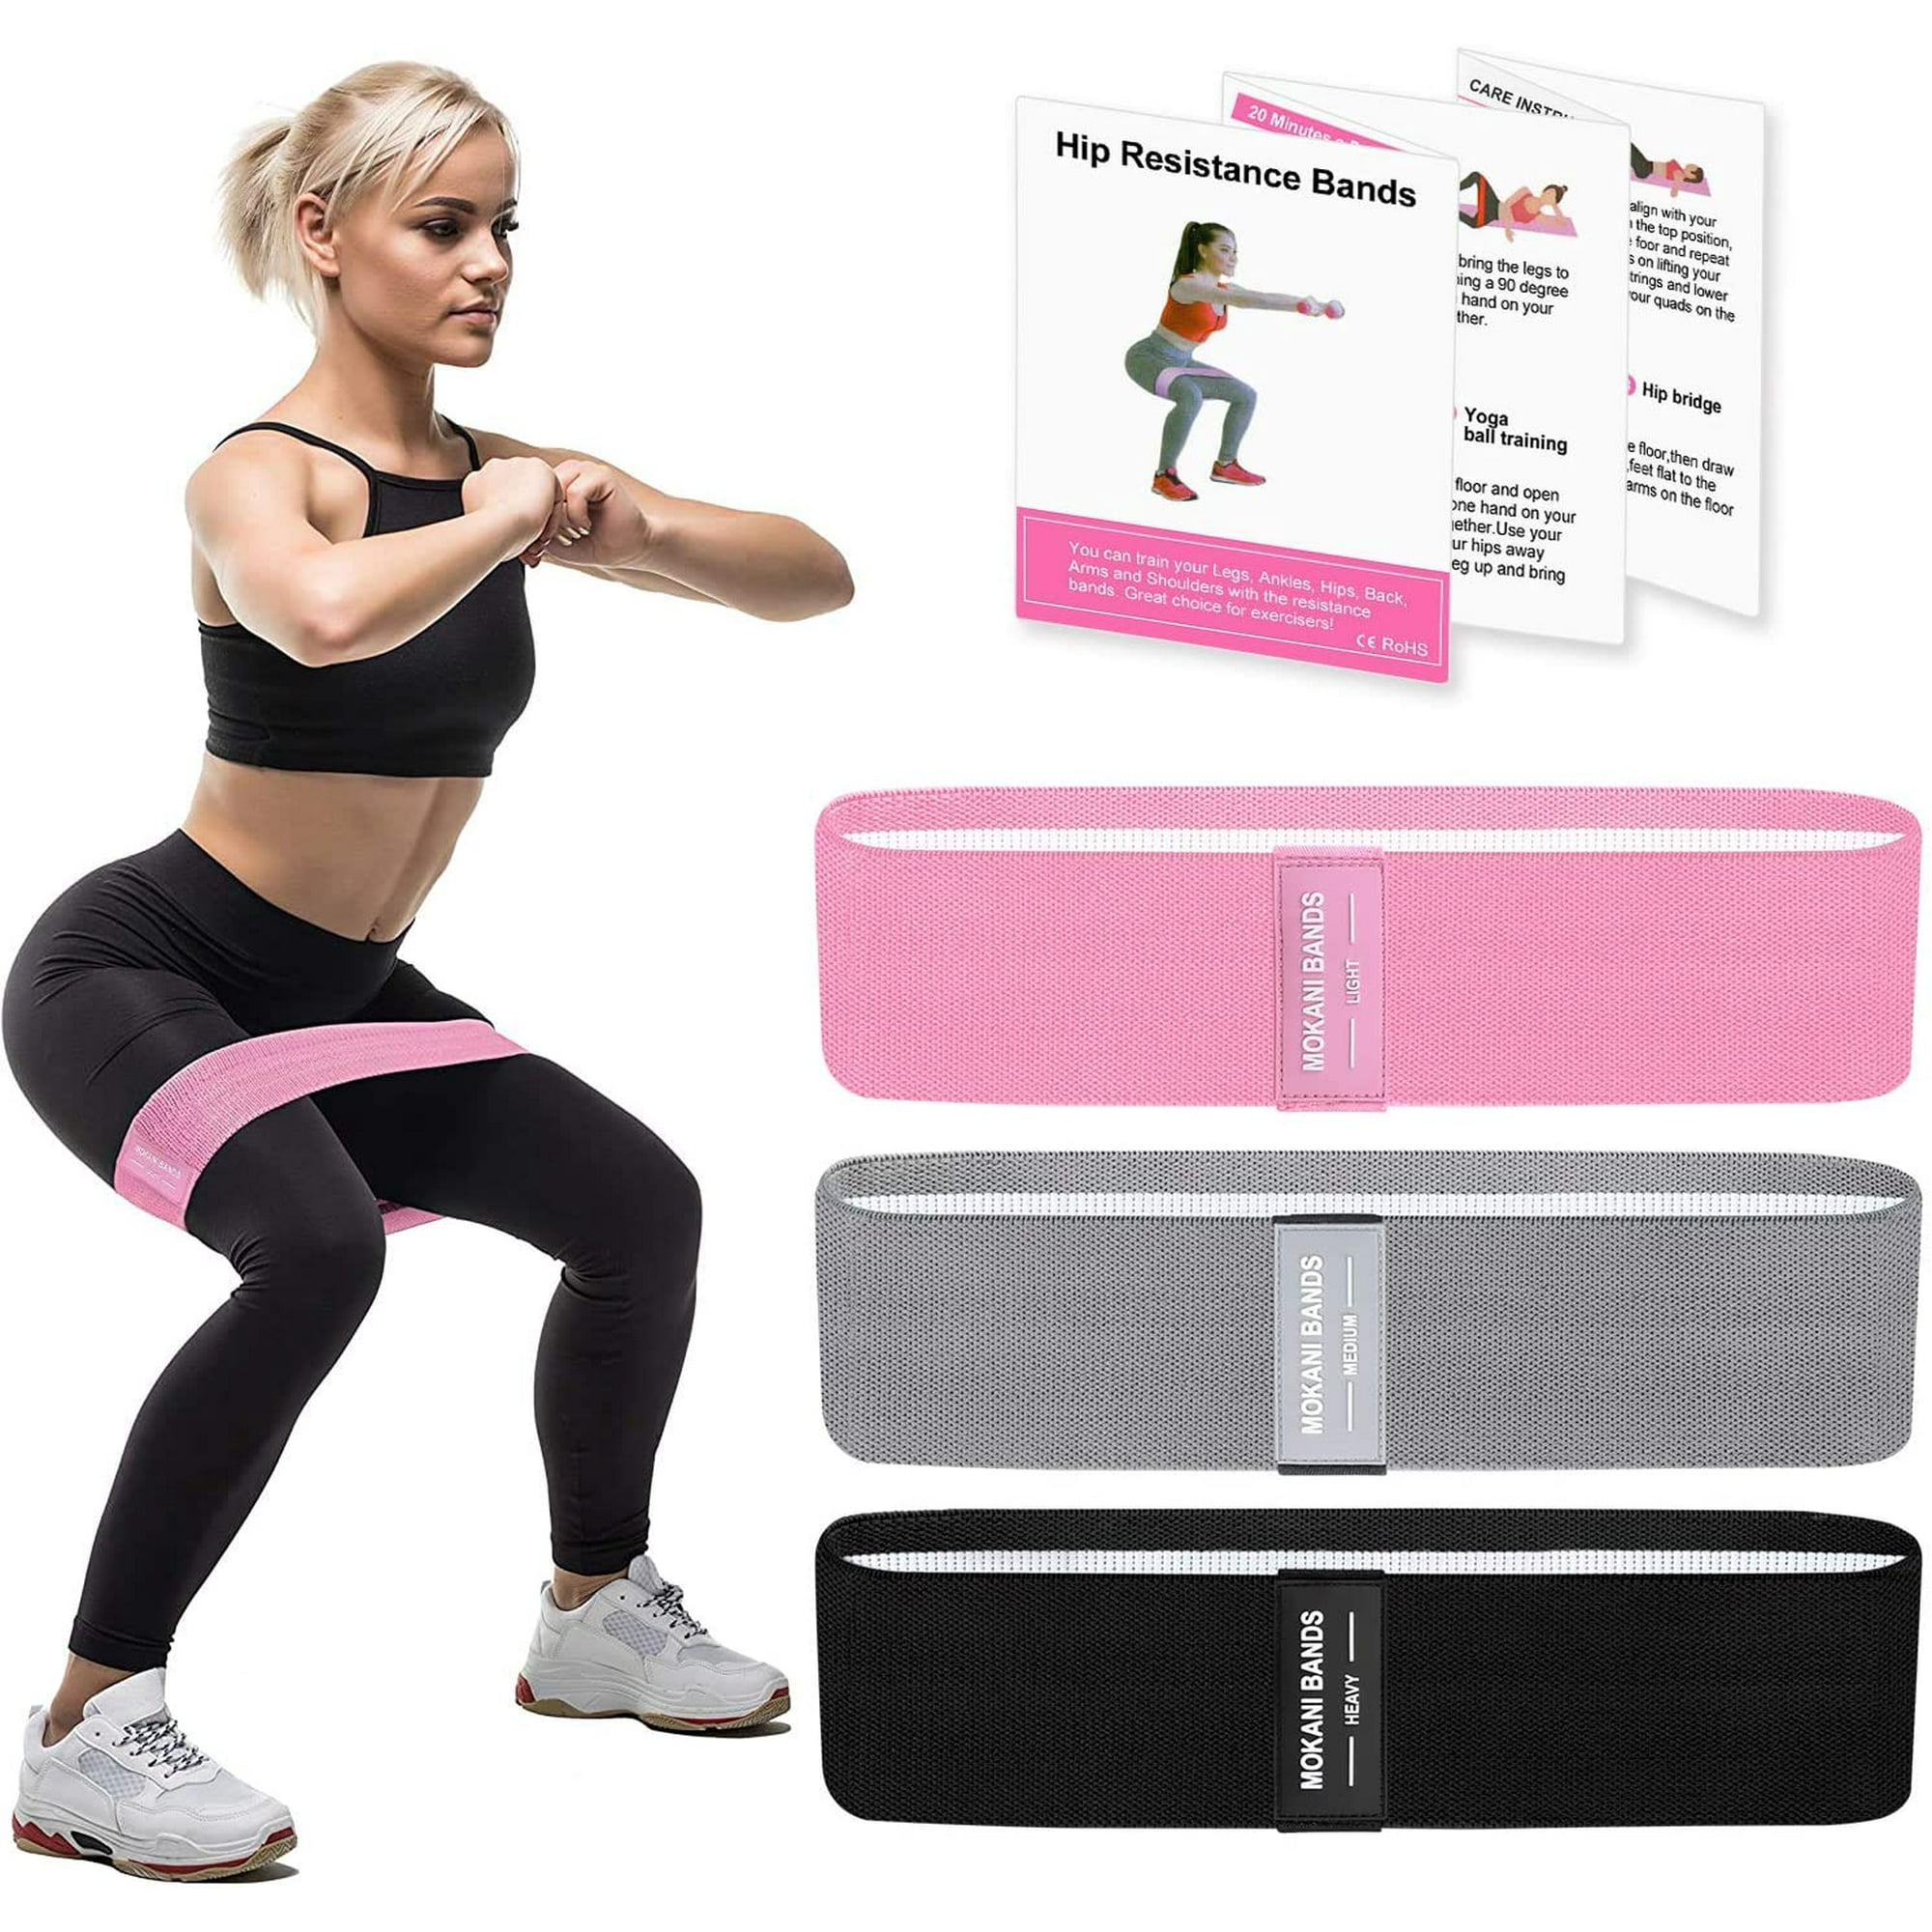 koppeling Knorretje Dressoir Mokani Resistance Bands for Legs and Butt, Fabric Exercise Bands Set  Booty/Hip Bands, Wide Sports Fitness Loops for Workout Anti Slip Elastic,  Set of 3 | Walmart Canada